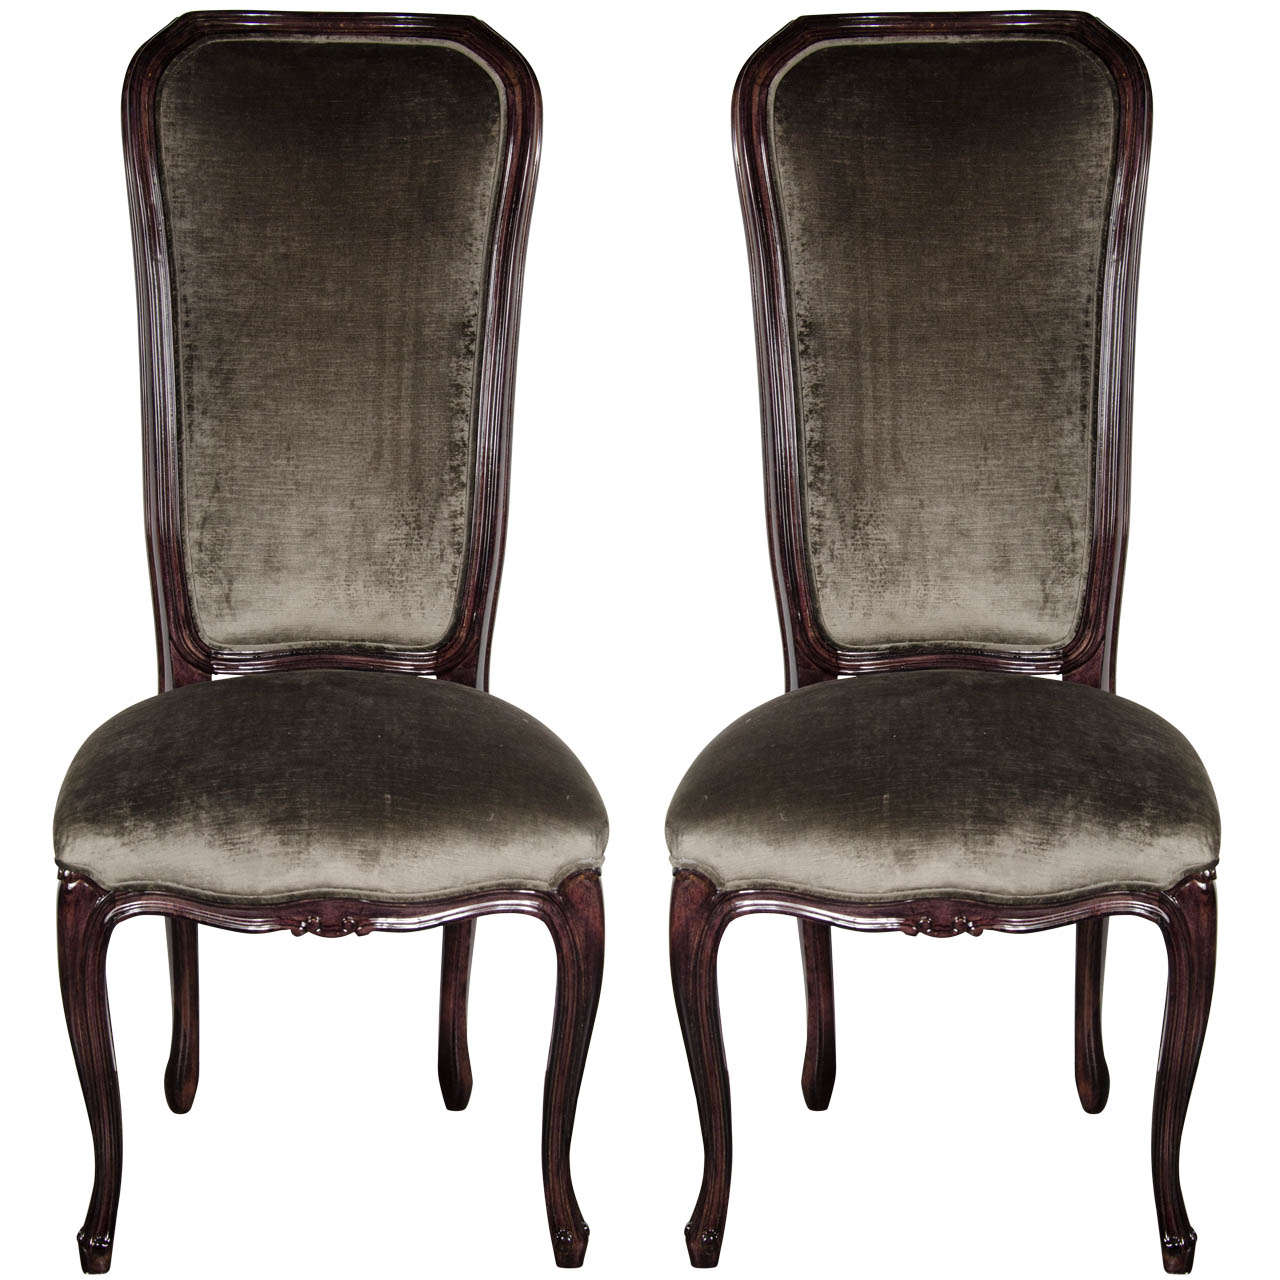 Elegant Pair of 1940's High Back Occasional Chairs in Ebonized Walnut